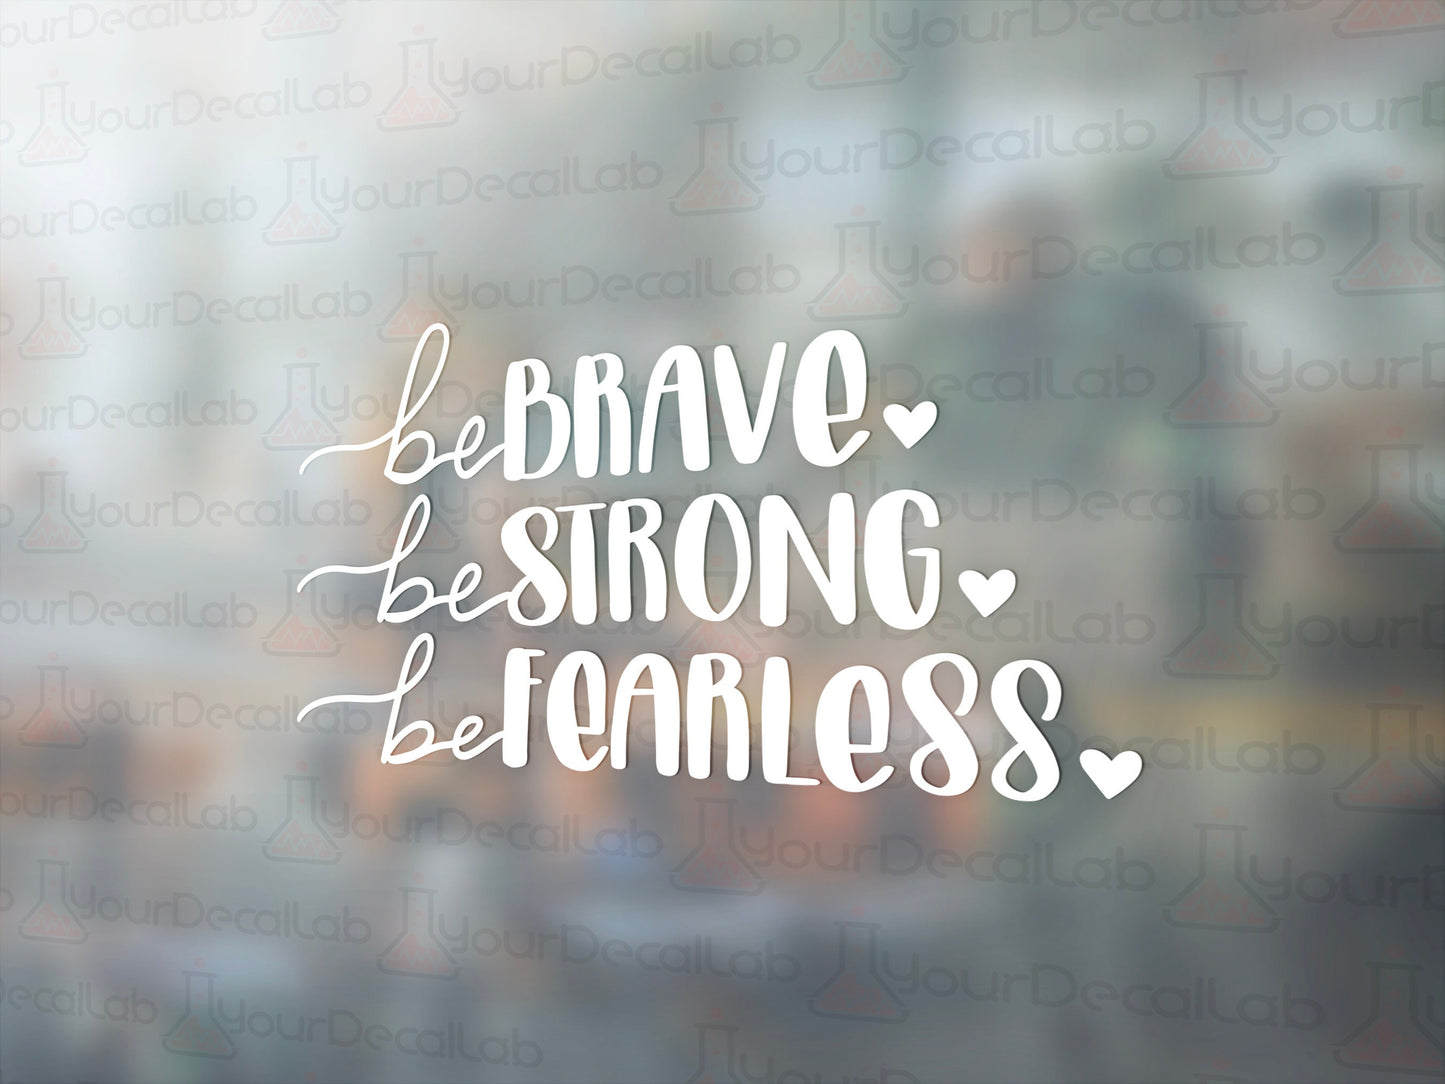 Brave, Strong, Fearless Decal - Many Colors & Sizes